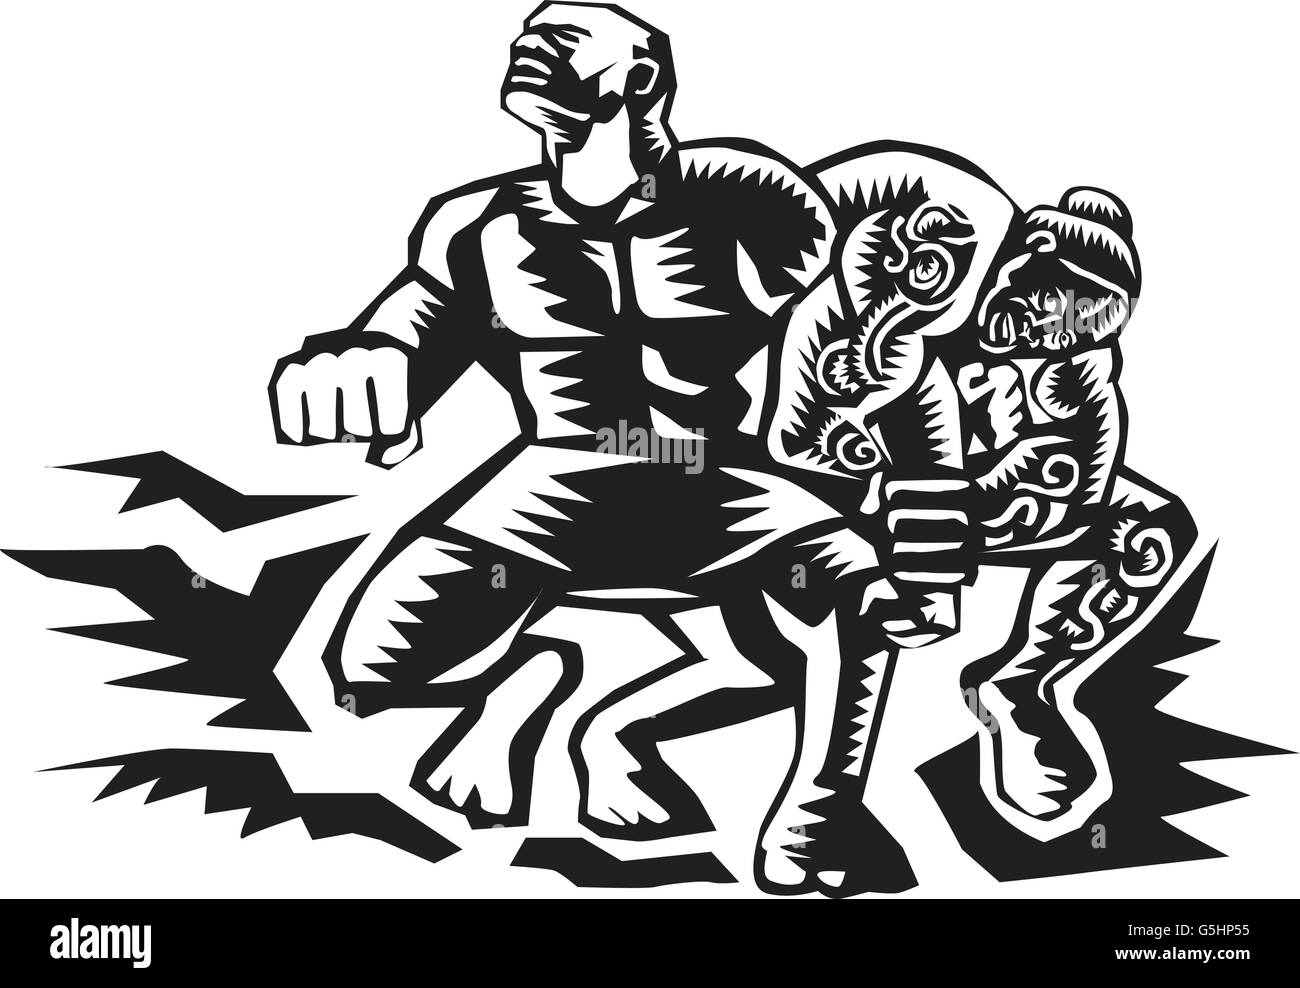 Illustration of Samoan legendTiitii wrestling the God of Earthquake and breaking his arm done in retro woodcut style. Stock Vector